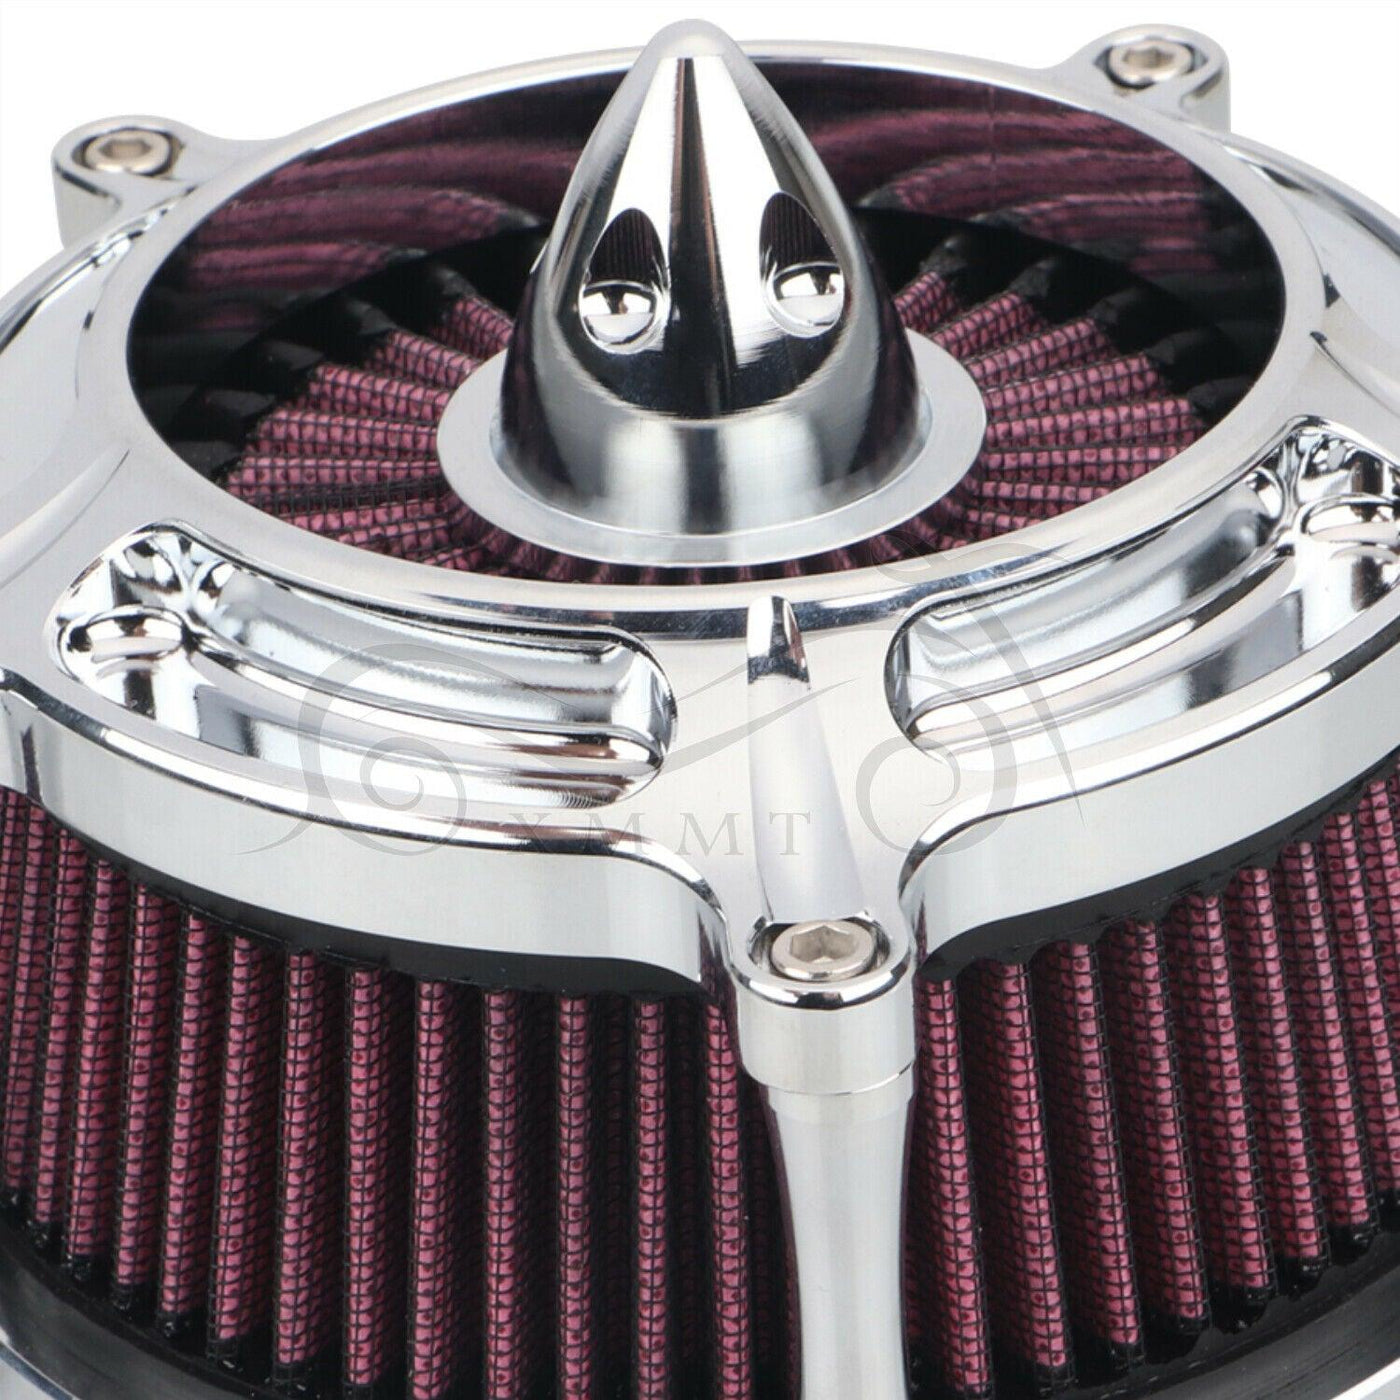 Air Cleaner Intake Filter For Harley Softail Dyna Touring Road King Street Glide - Moto Life Products